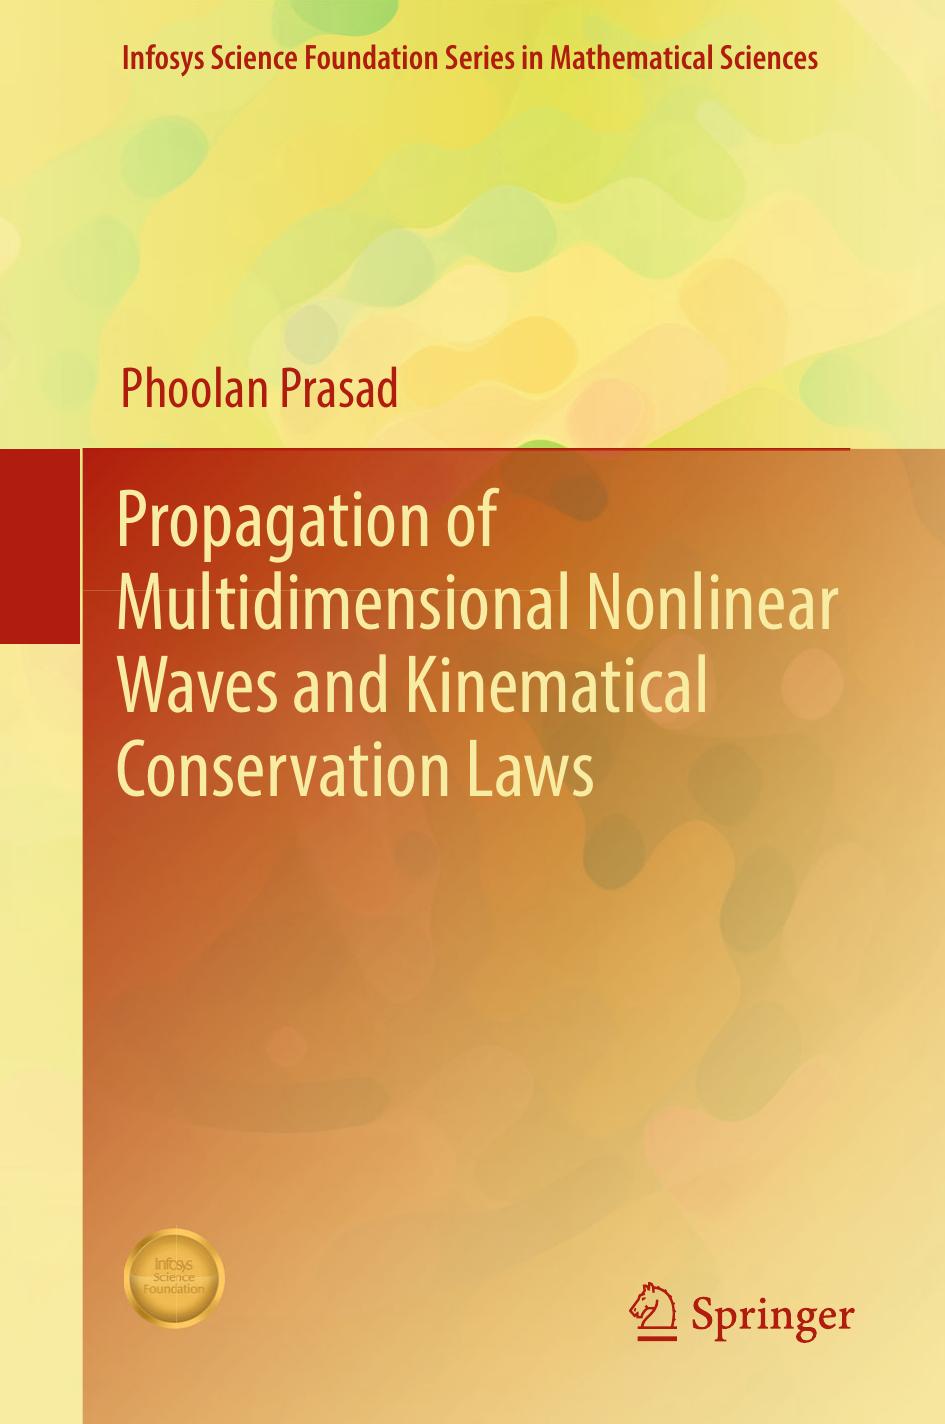 Propagation of Multidimensional Nonlinear Waves and Kinematical Conservation Laws by Phoolan Prasad